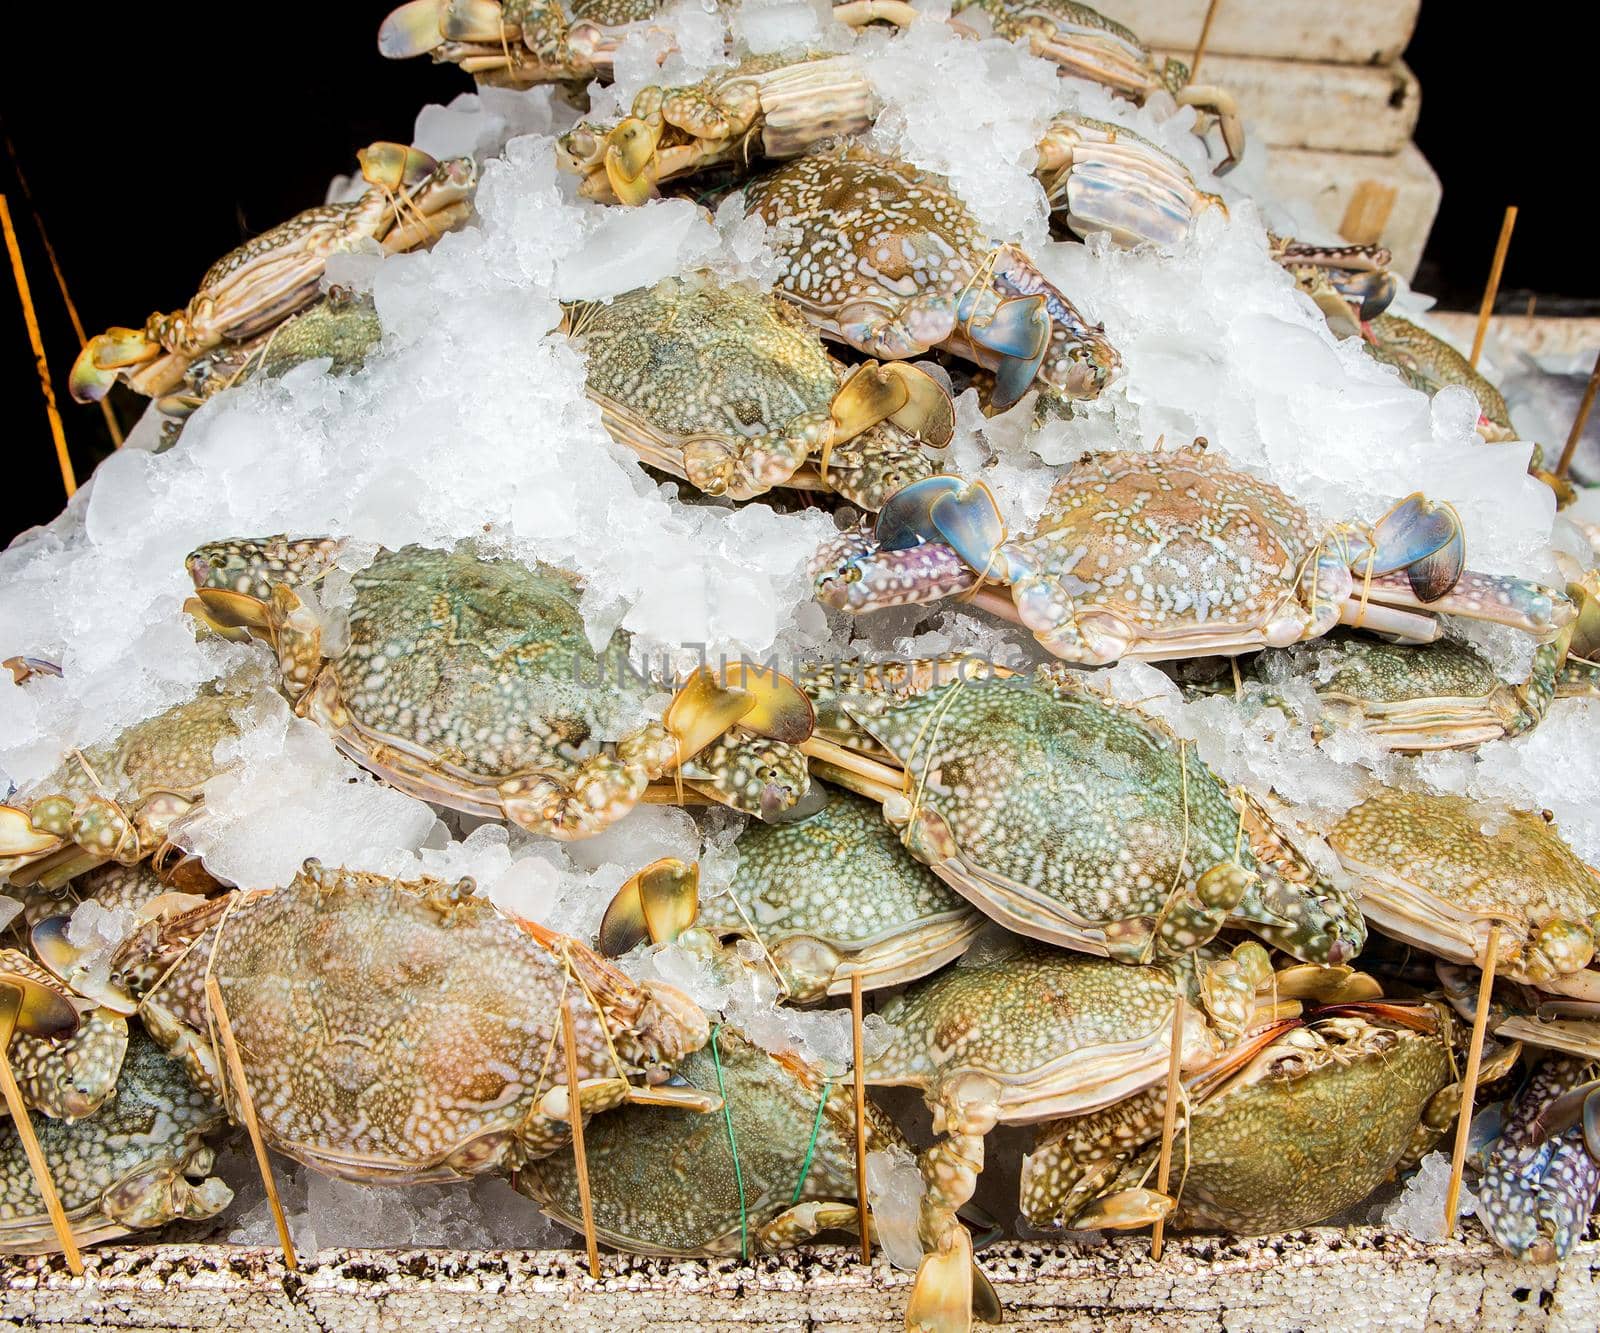 Crabs sold in the market by titipong